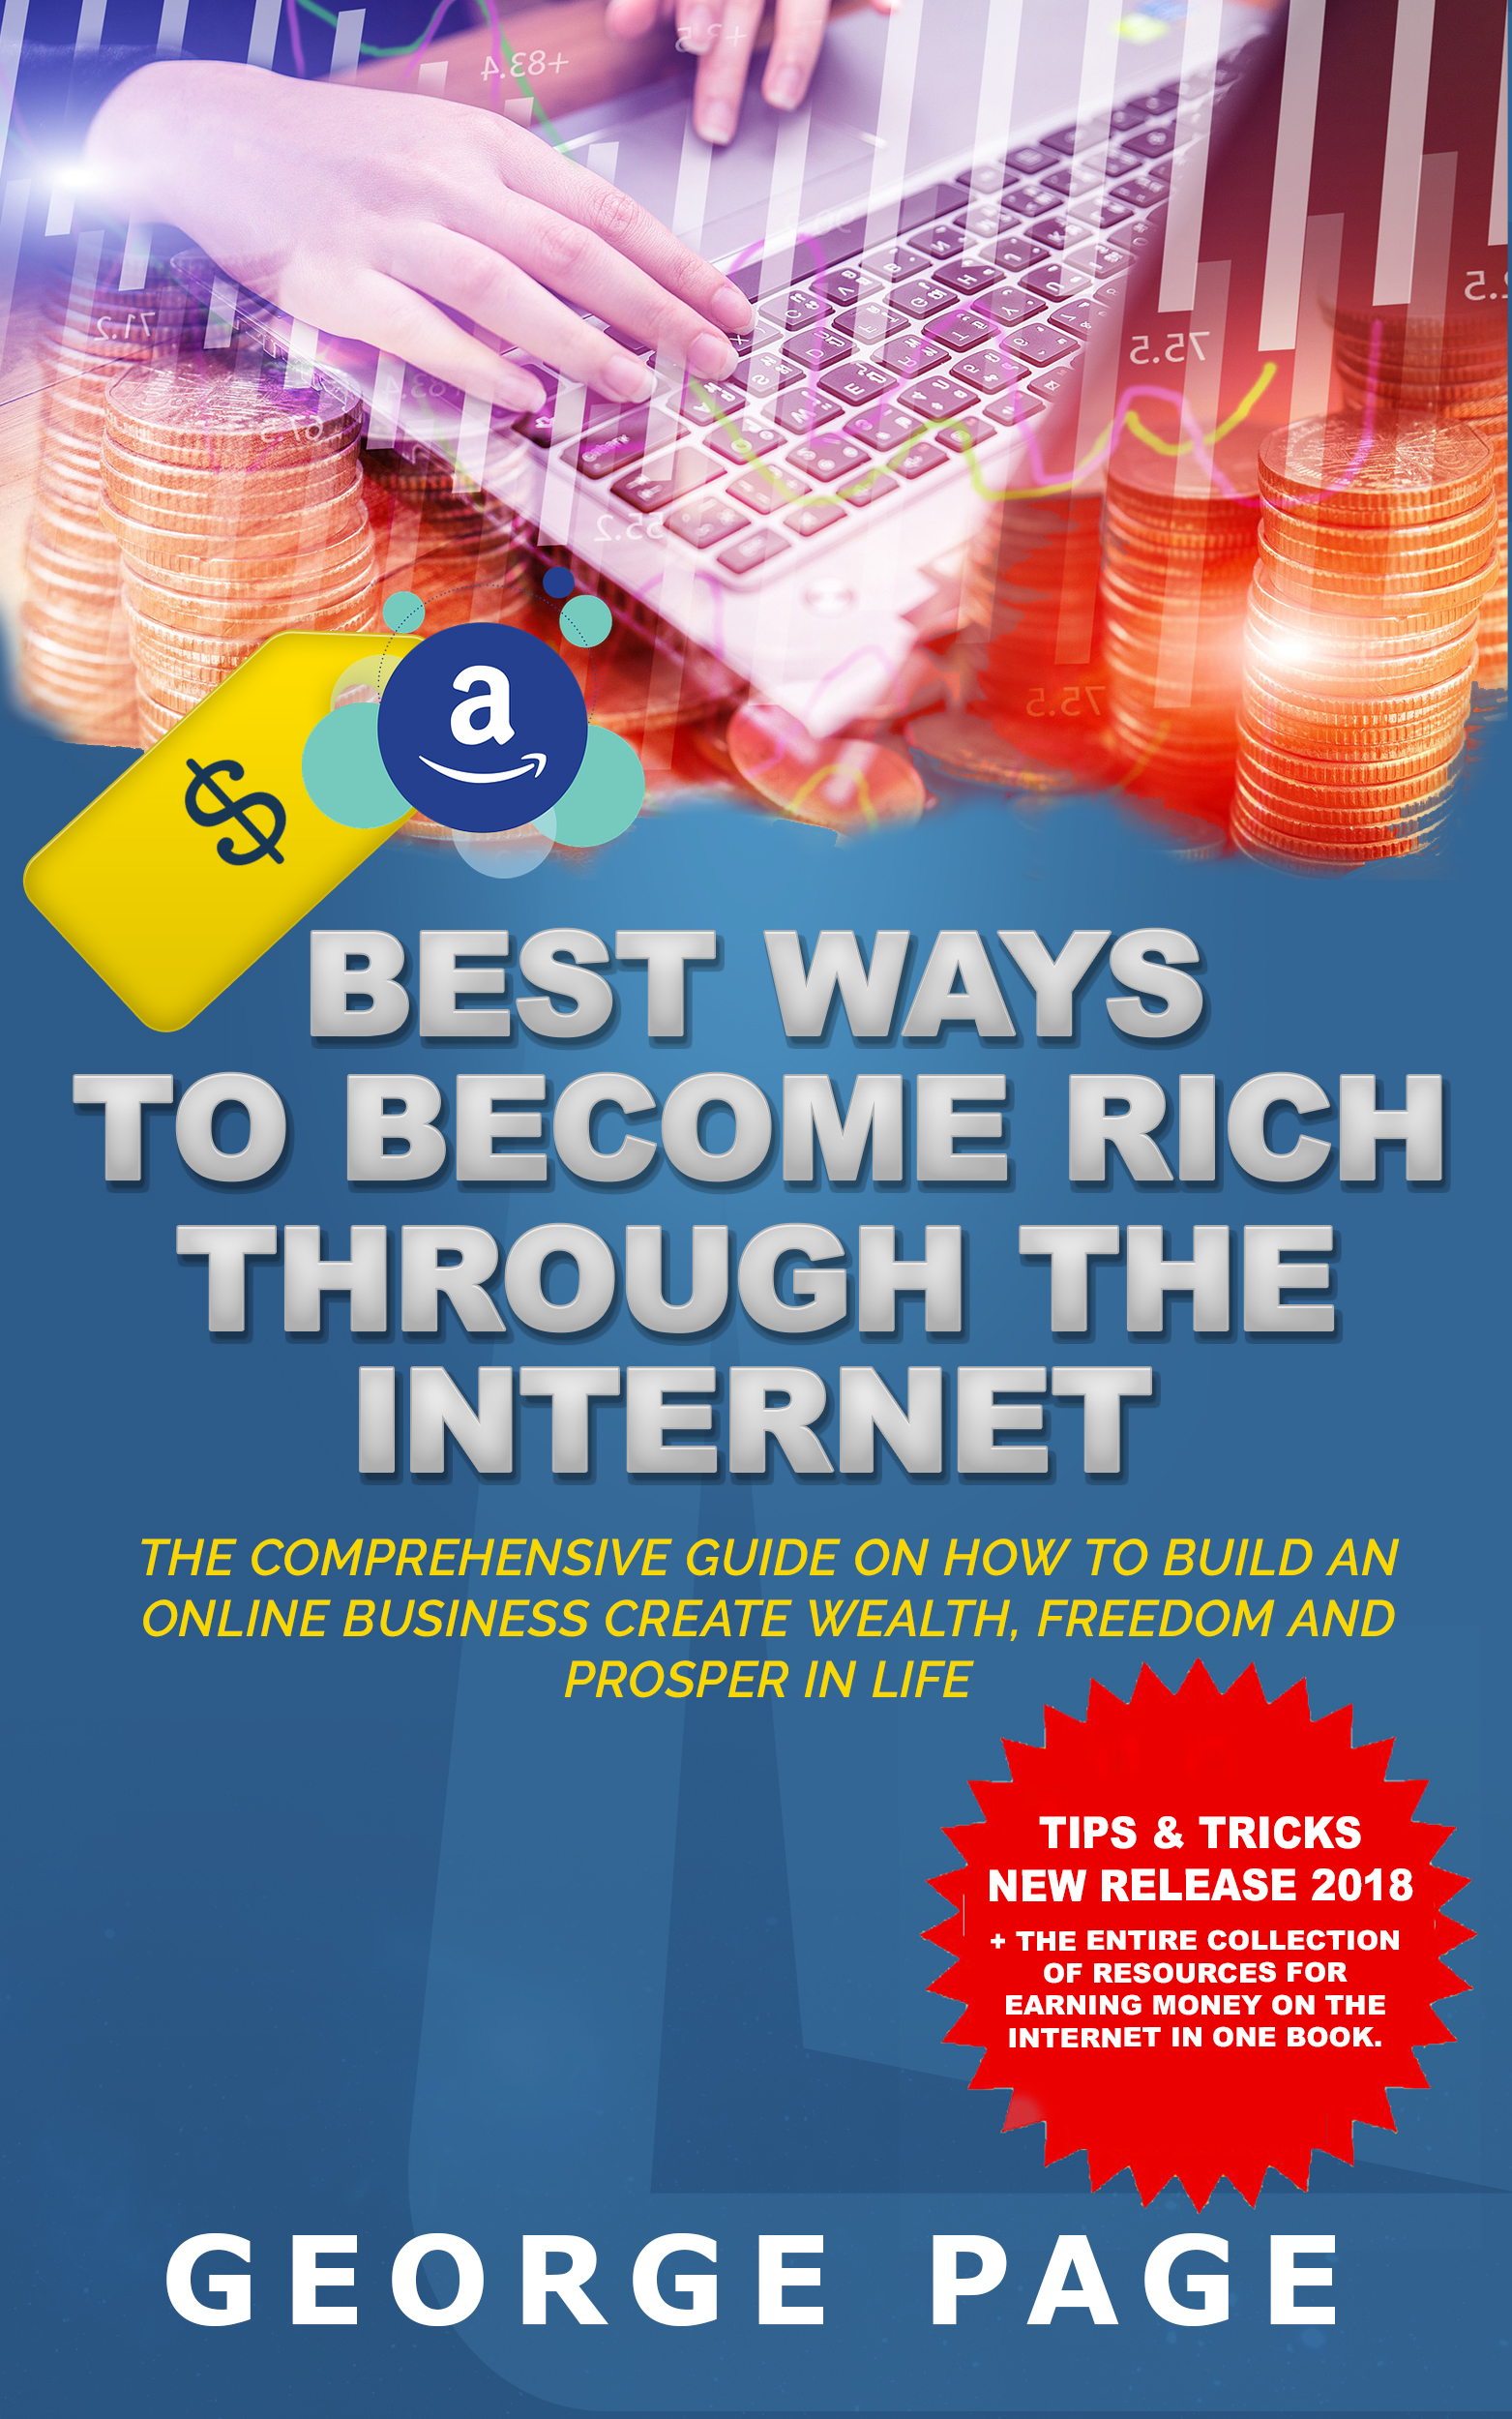 FREE: BEST WAYS TO BECOME RICH THROUGH THE INTERNET: THE COMPREHENSIVE GUIDE ON HOW TO BUILD AN ONLINE BUSINESS CREATE WEALTH, FREEDOM AND PROSPER IN LIFE by Edgar Burns